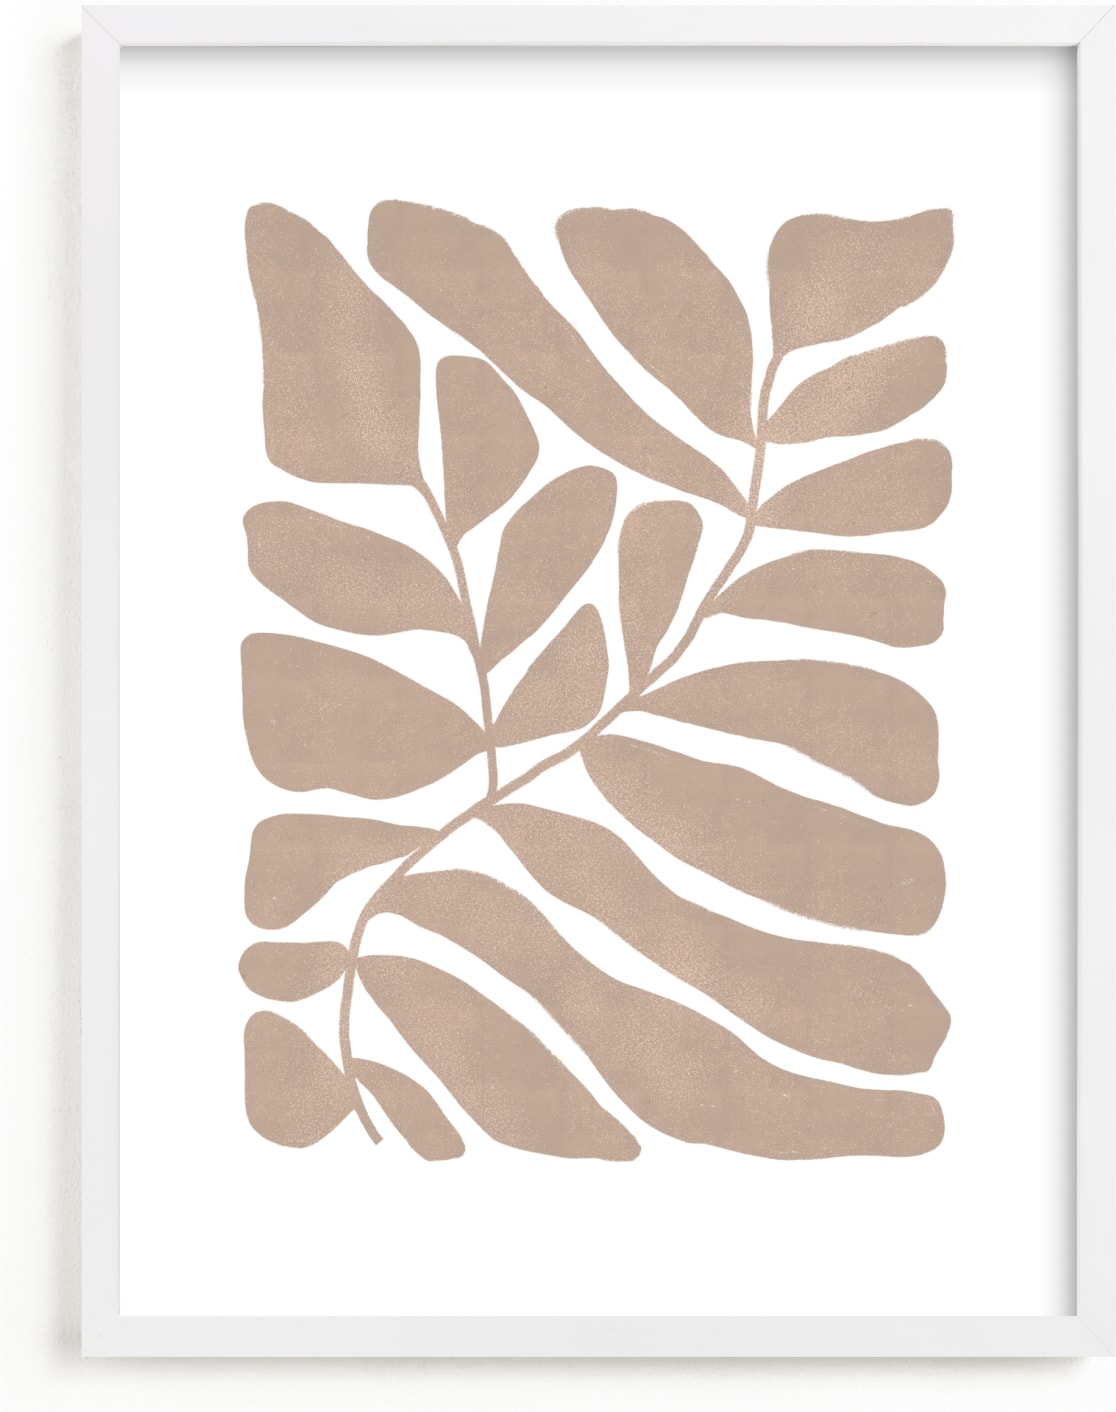 This is a brown, beige art by Kelly Ambrose called Loopy Leaves I.